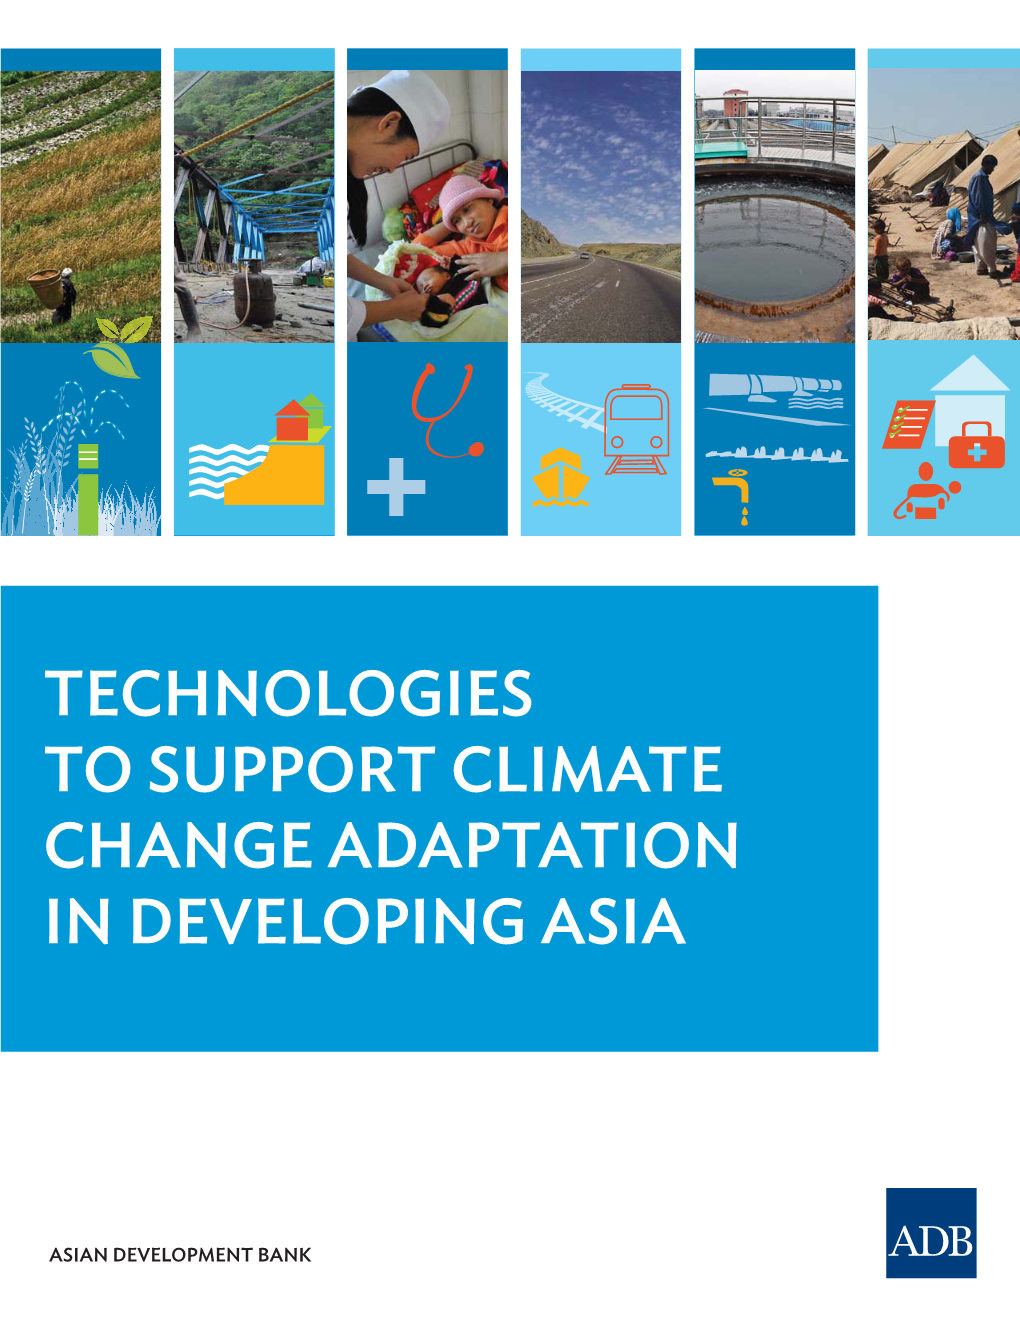 Technologies to Support Climate Change Adaptation in Developing Asia